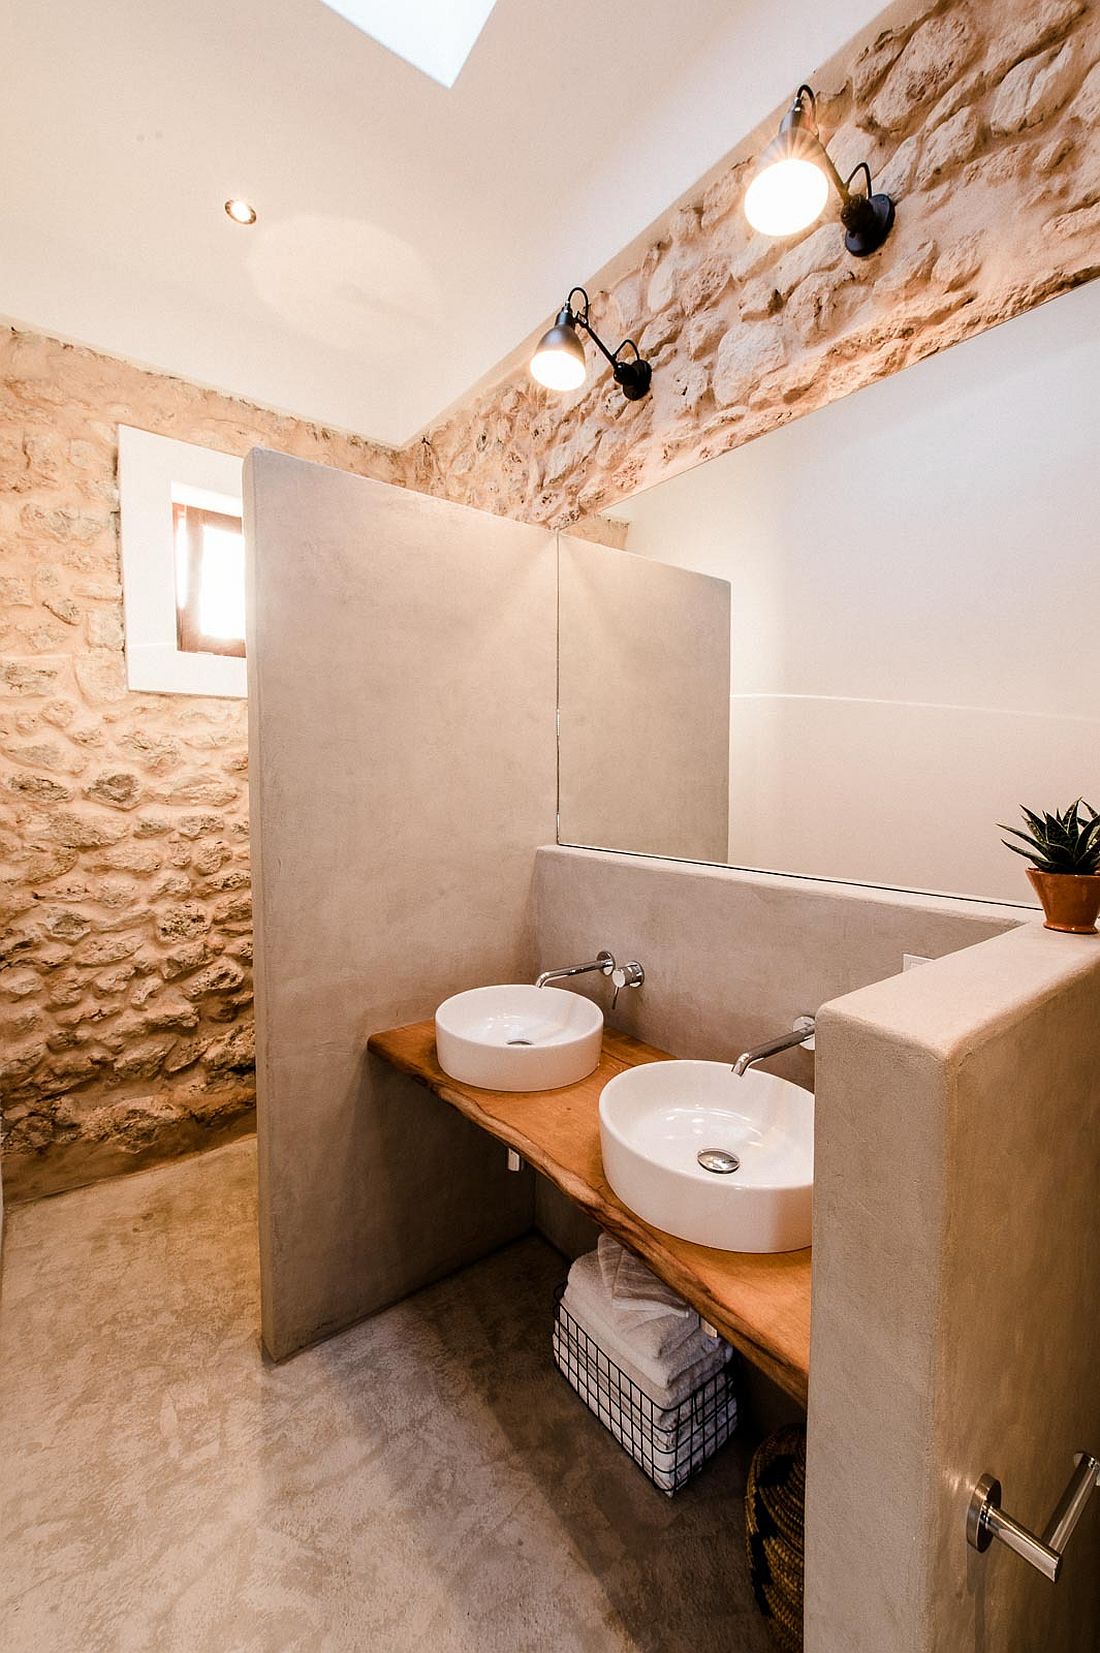 Classic stone walls coupled with modern aesthetics and live edge vanity in the bathroom